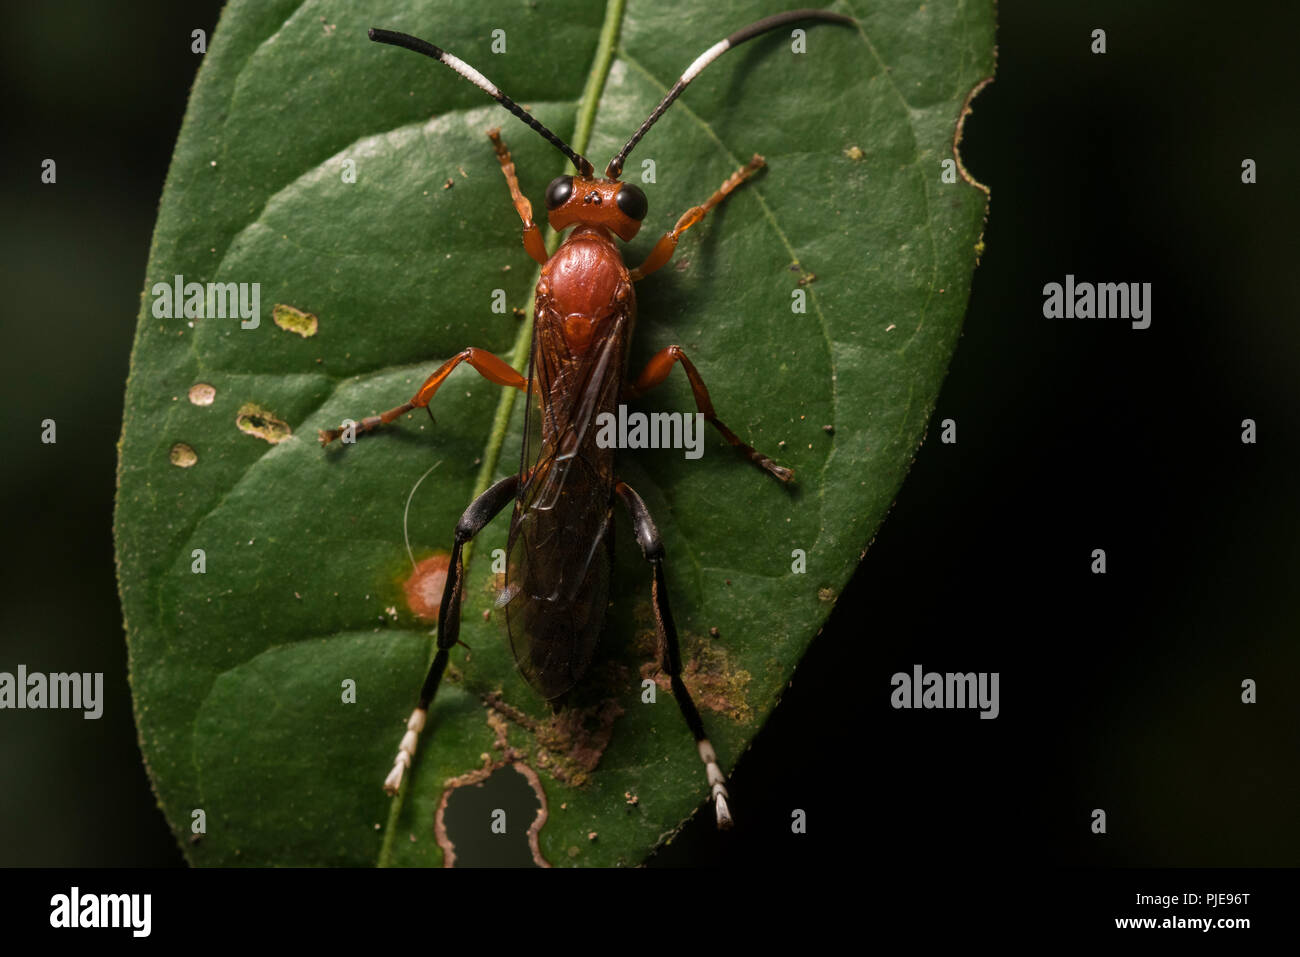 A small red wasp from the Amazon jungle in Southern Peru. Stock Photo